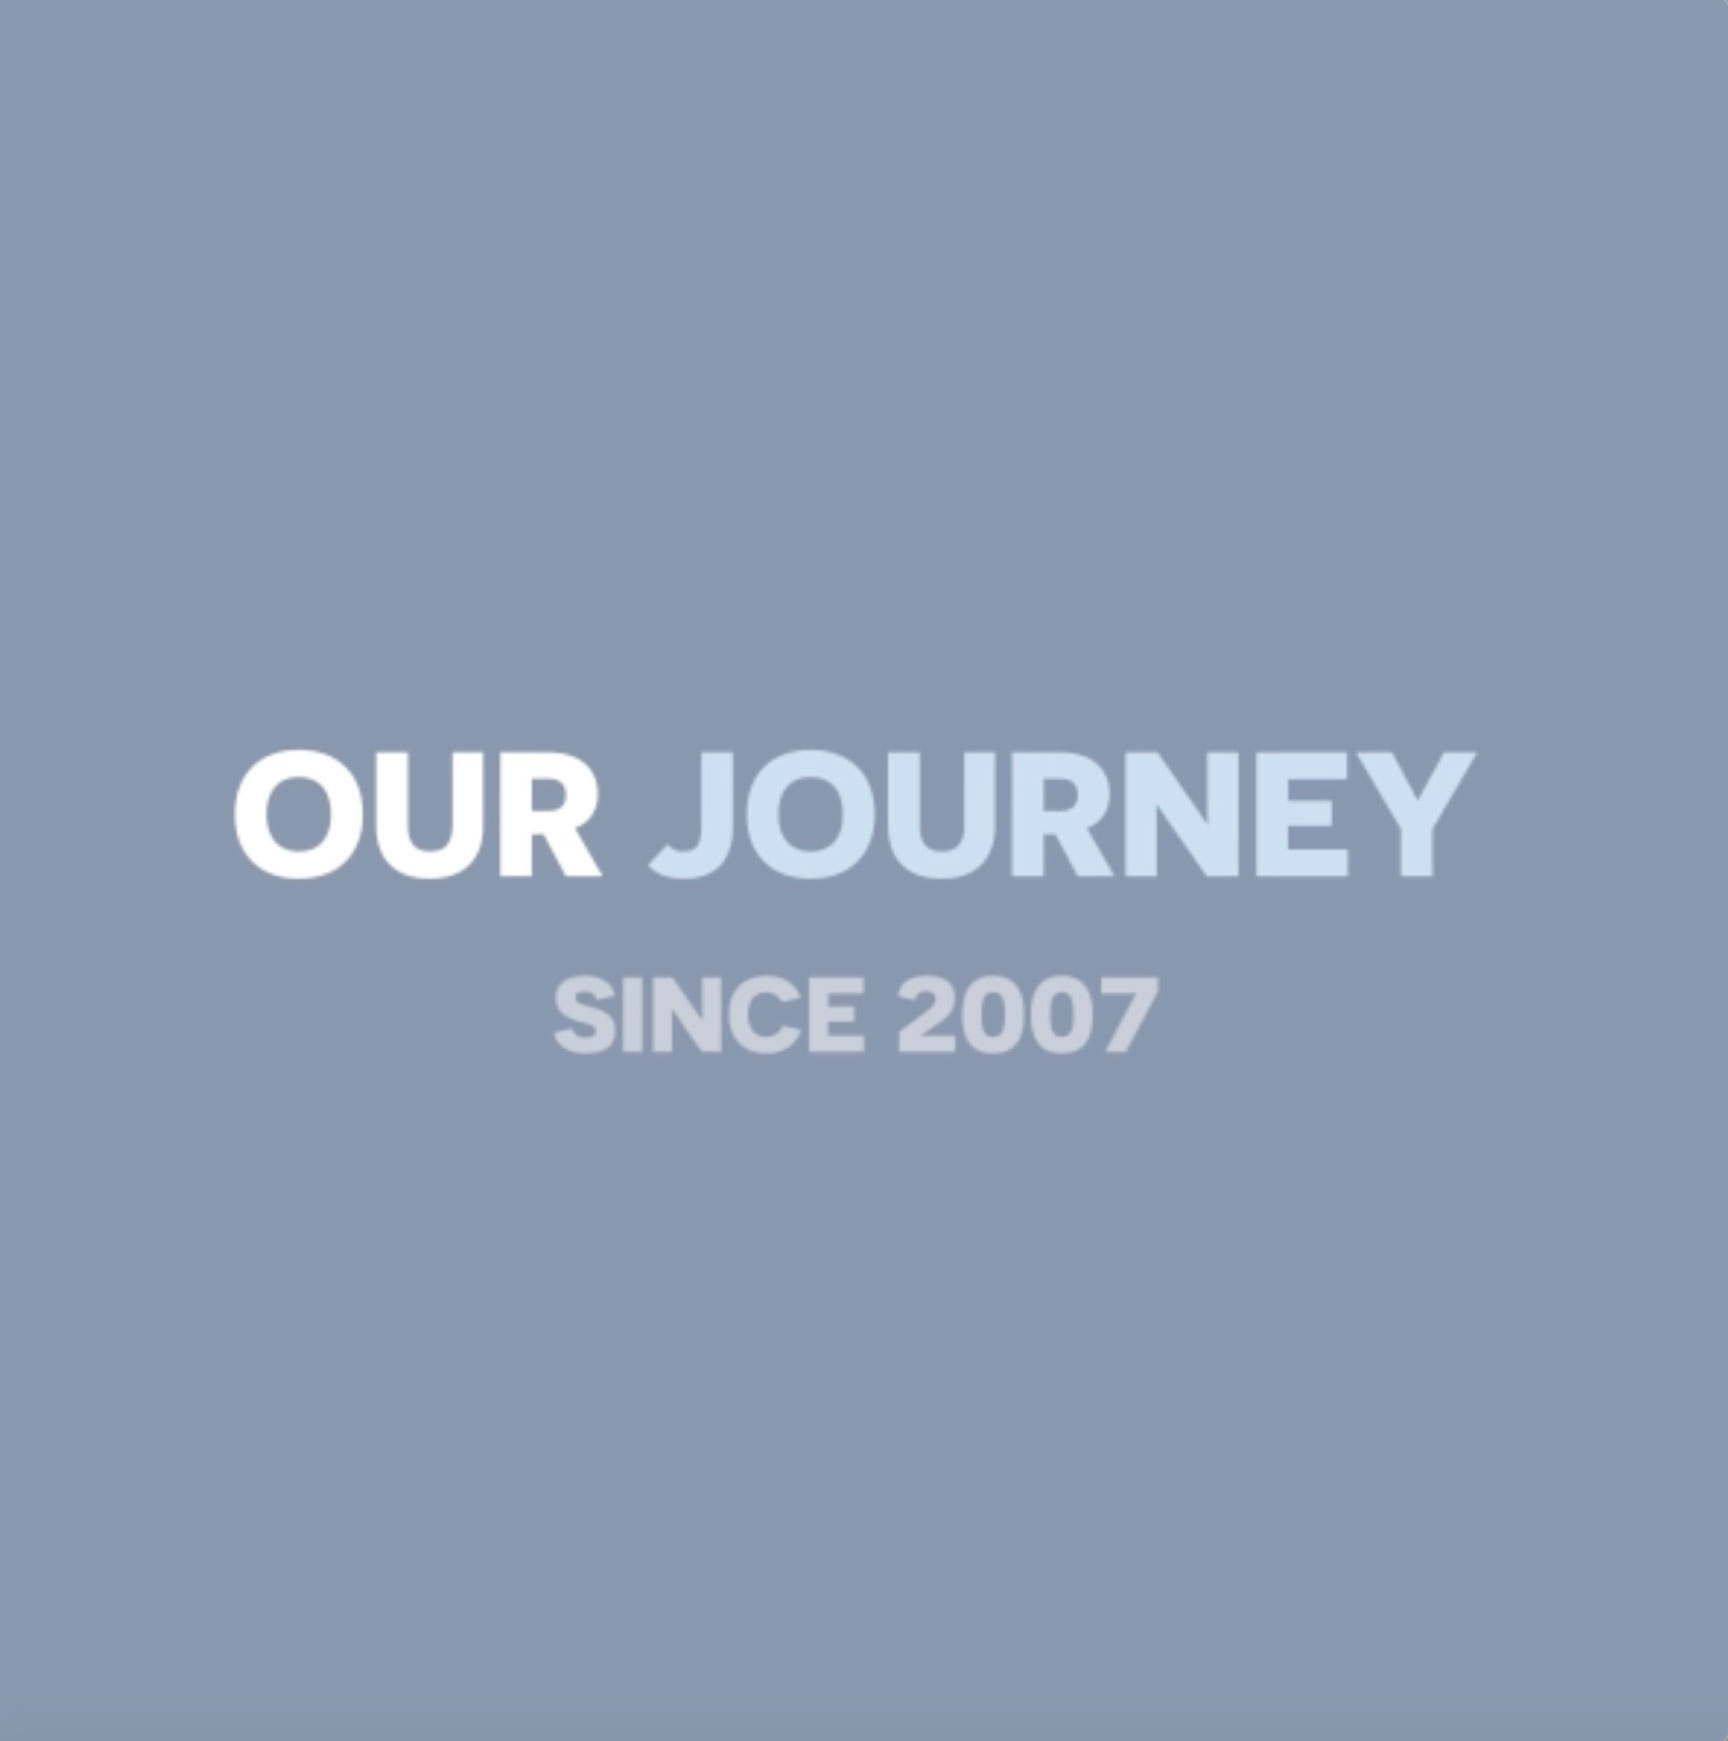 Our Journey Since 2007